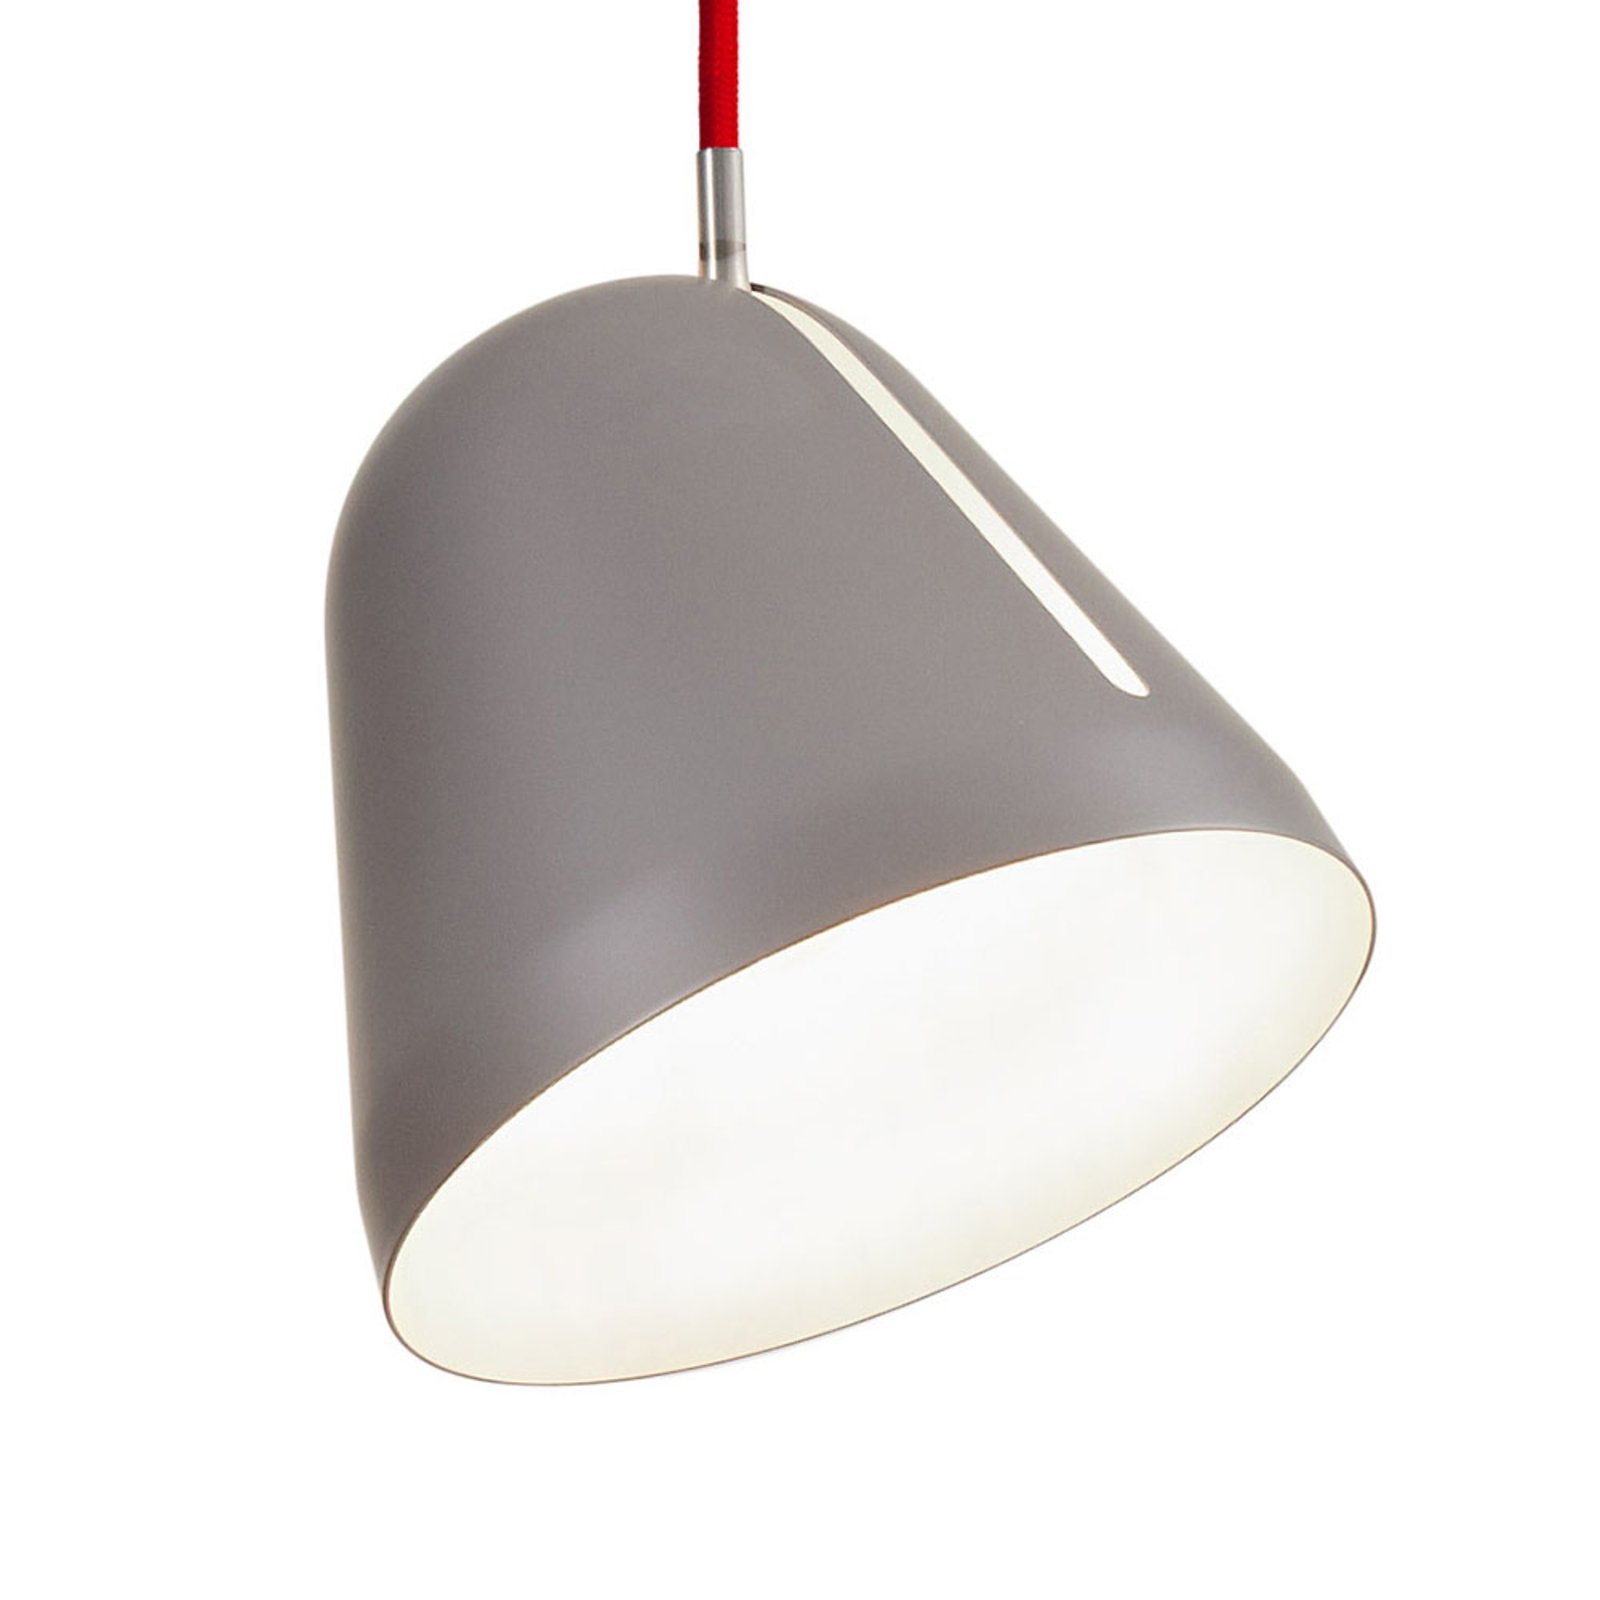 Nyta Tilt S pendant light, 3 m red cable, grey